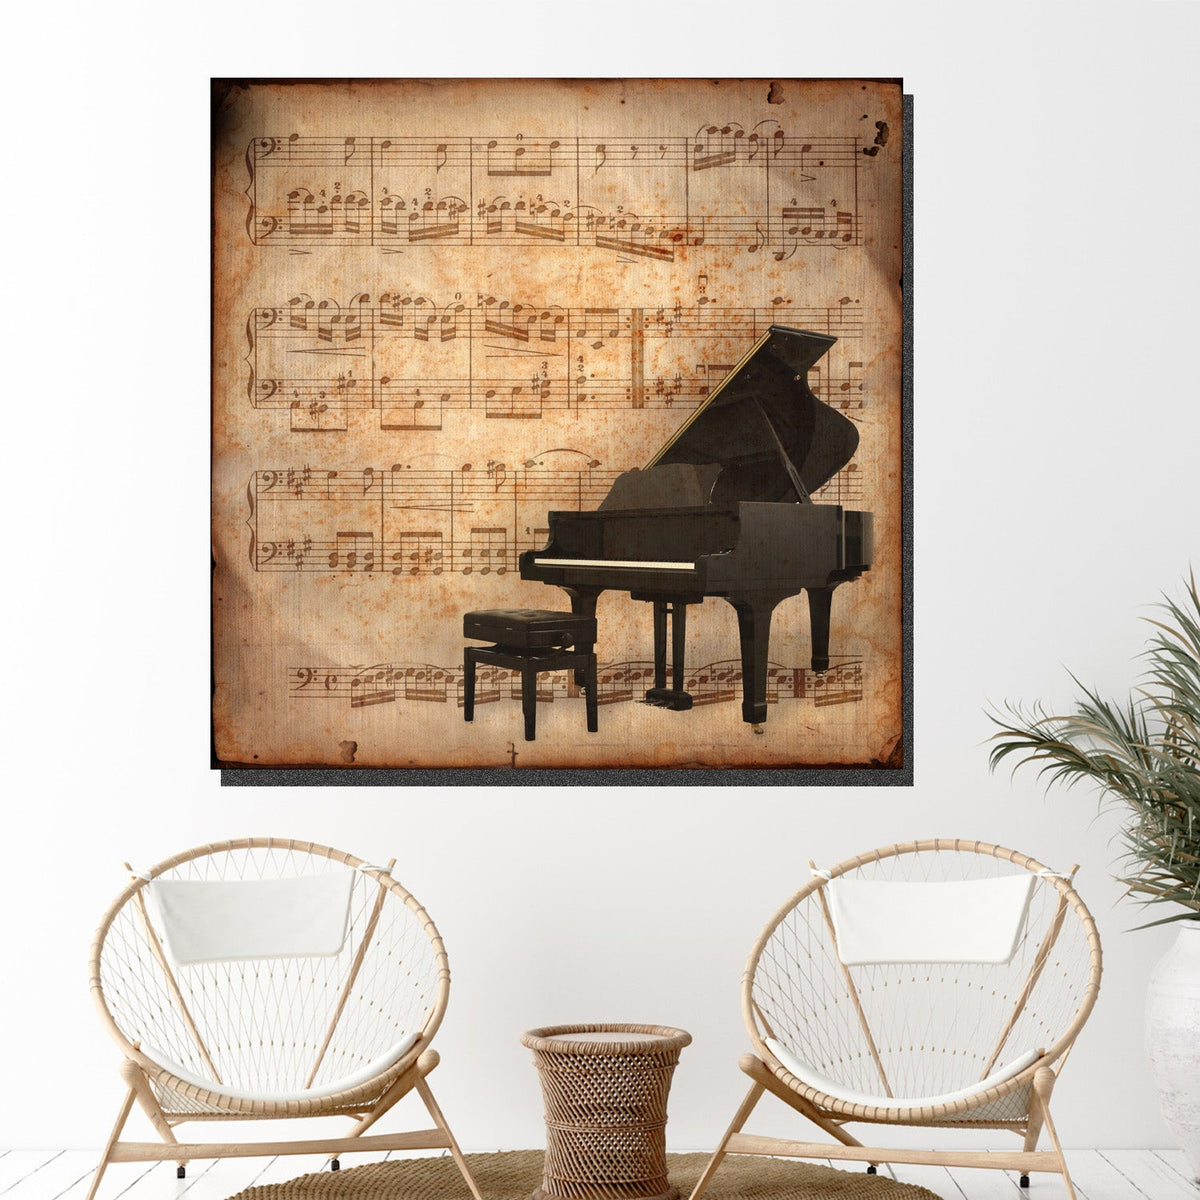 https://cdn.shopify.com/s/files/1/0387/9986/8044/products/AntiquePianoCanvasArtprintStretched-2.jpg